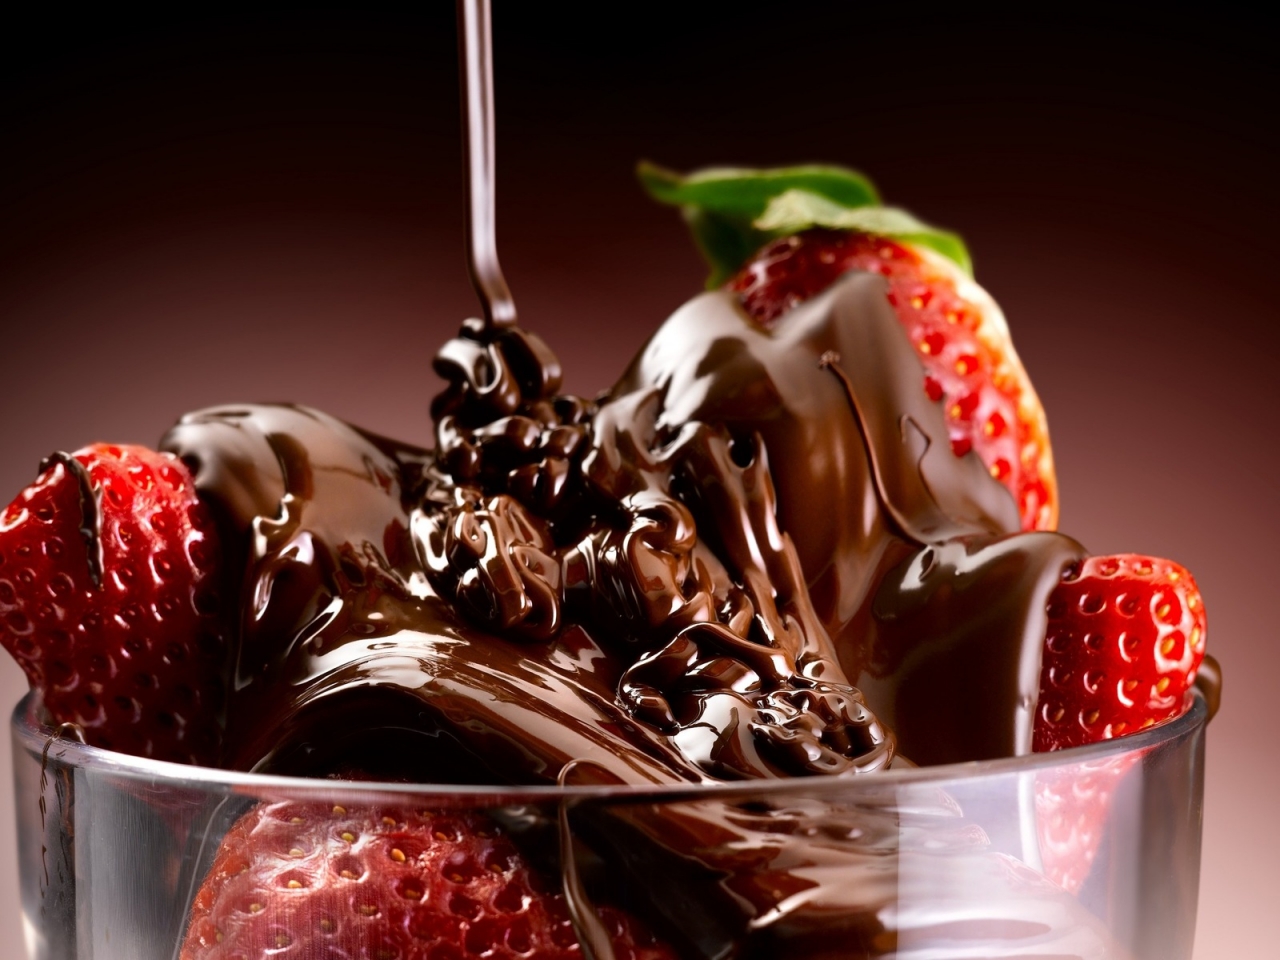 Chocolate and Strawberries for 1280 x 960 resolution